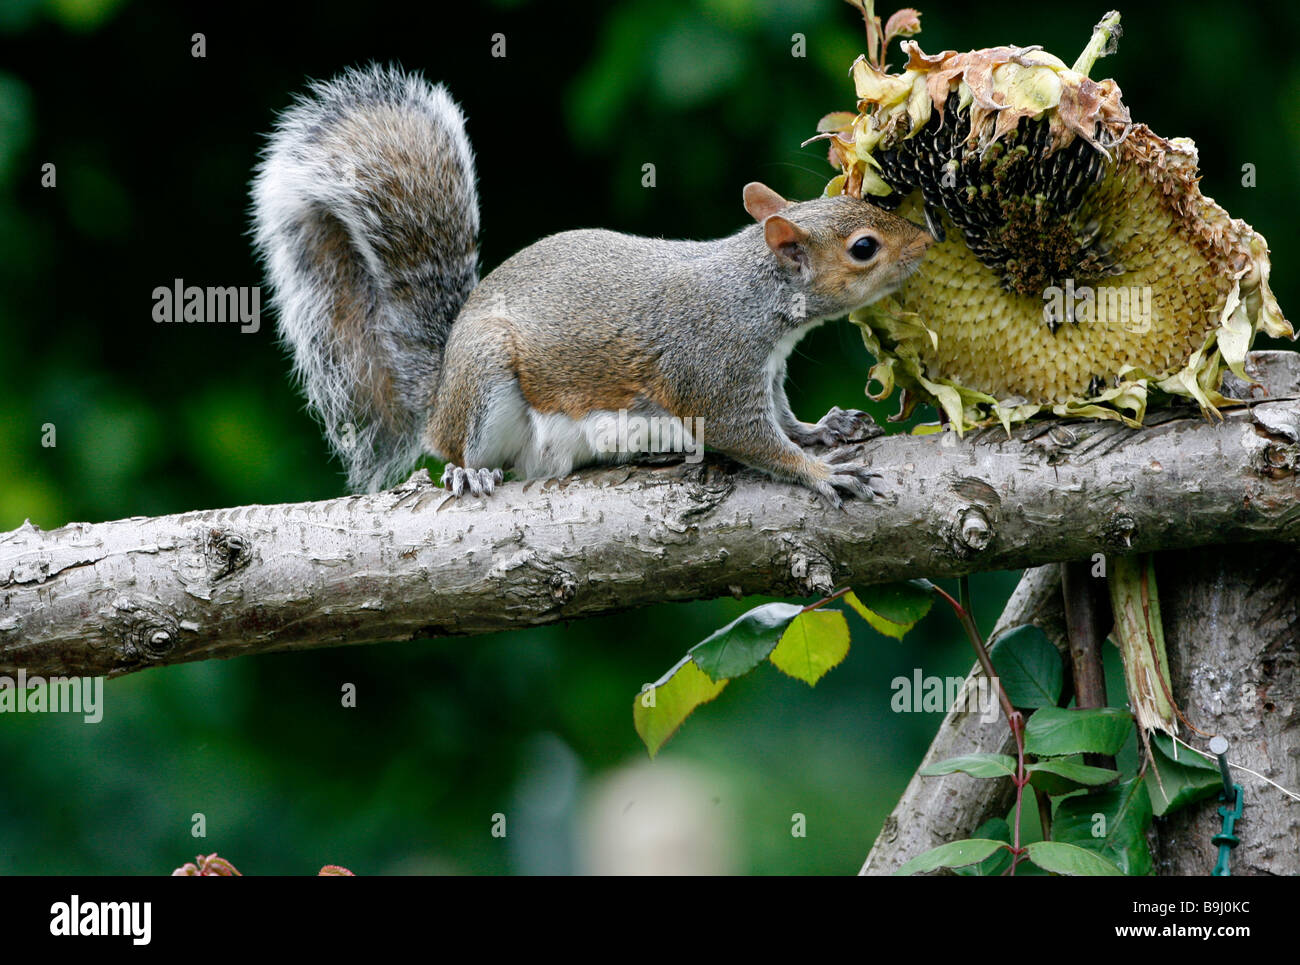 Grey Squirrel feeding on seeds from drying sunflower head Stock Photo